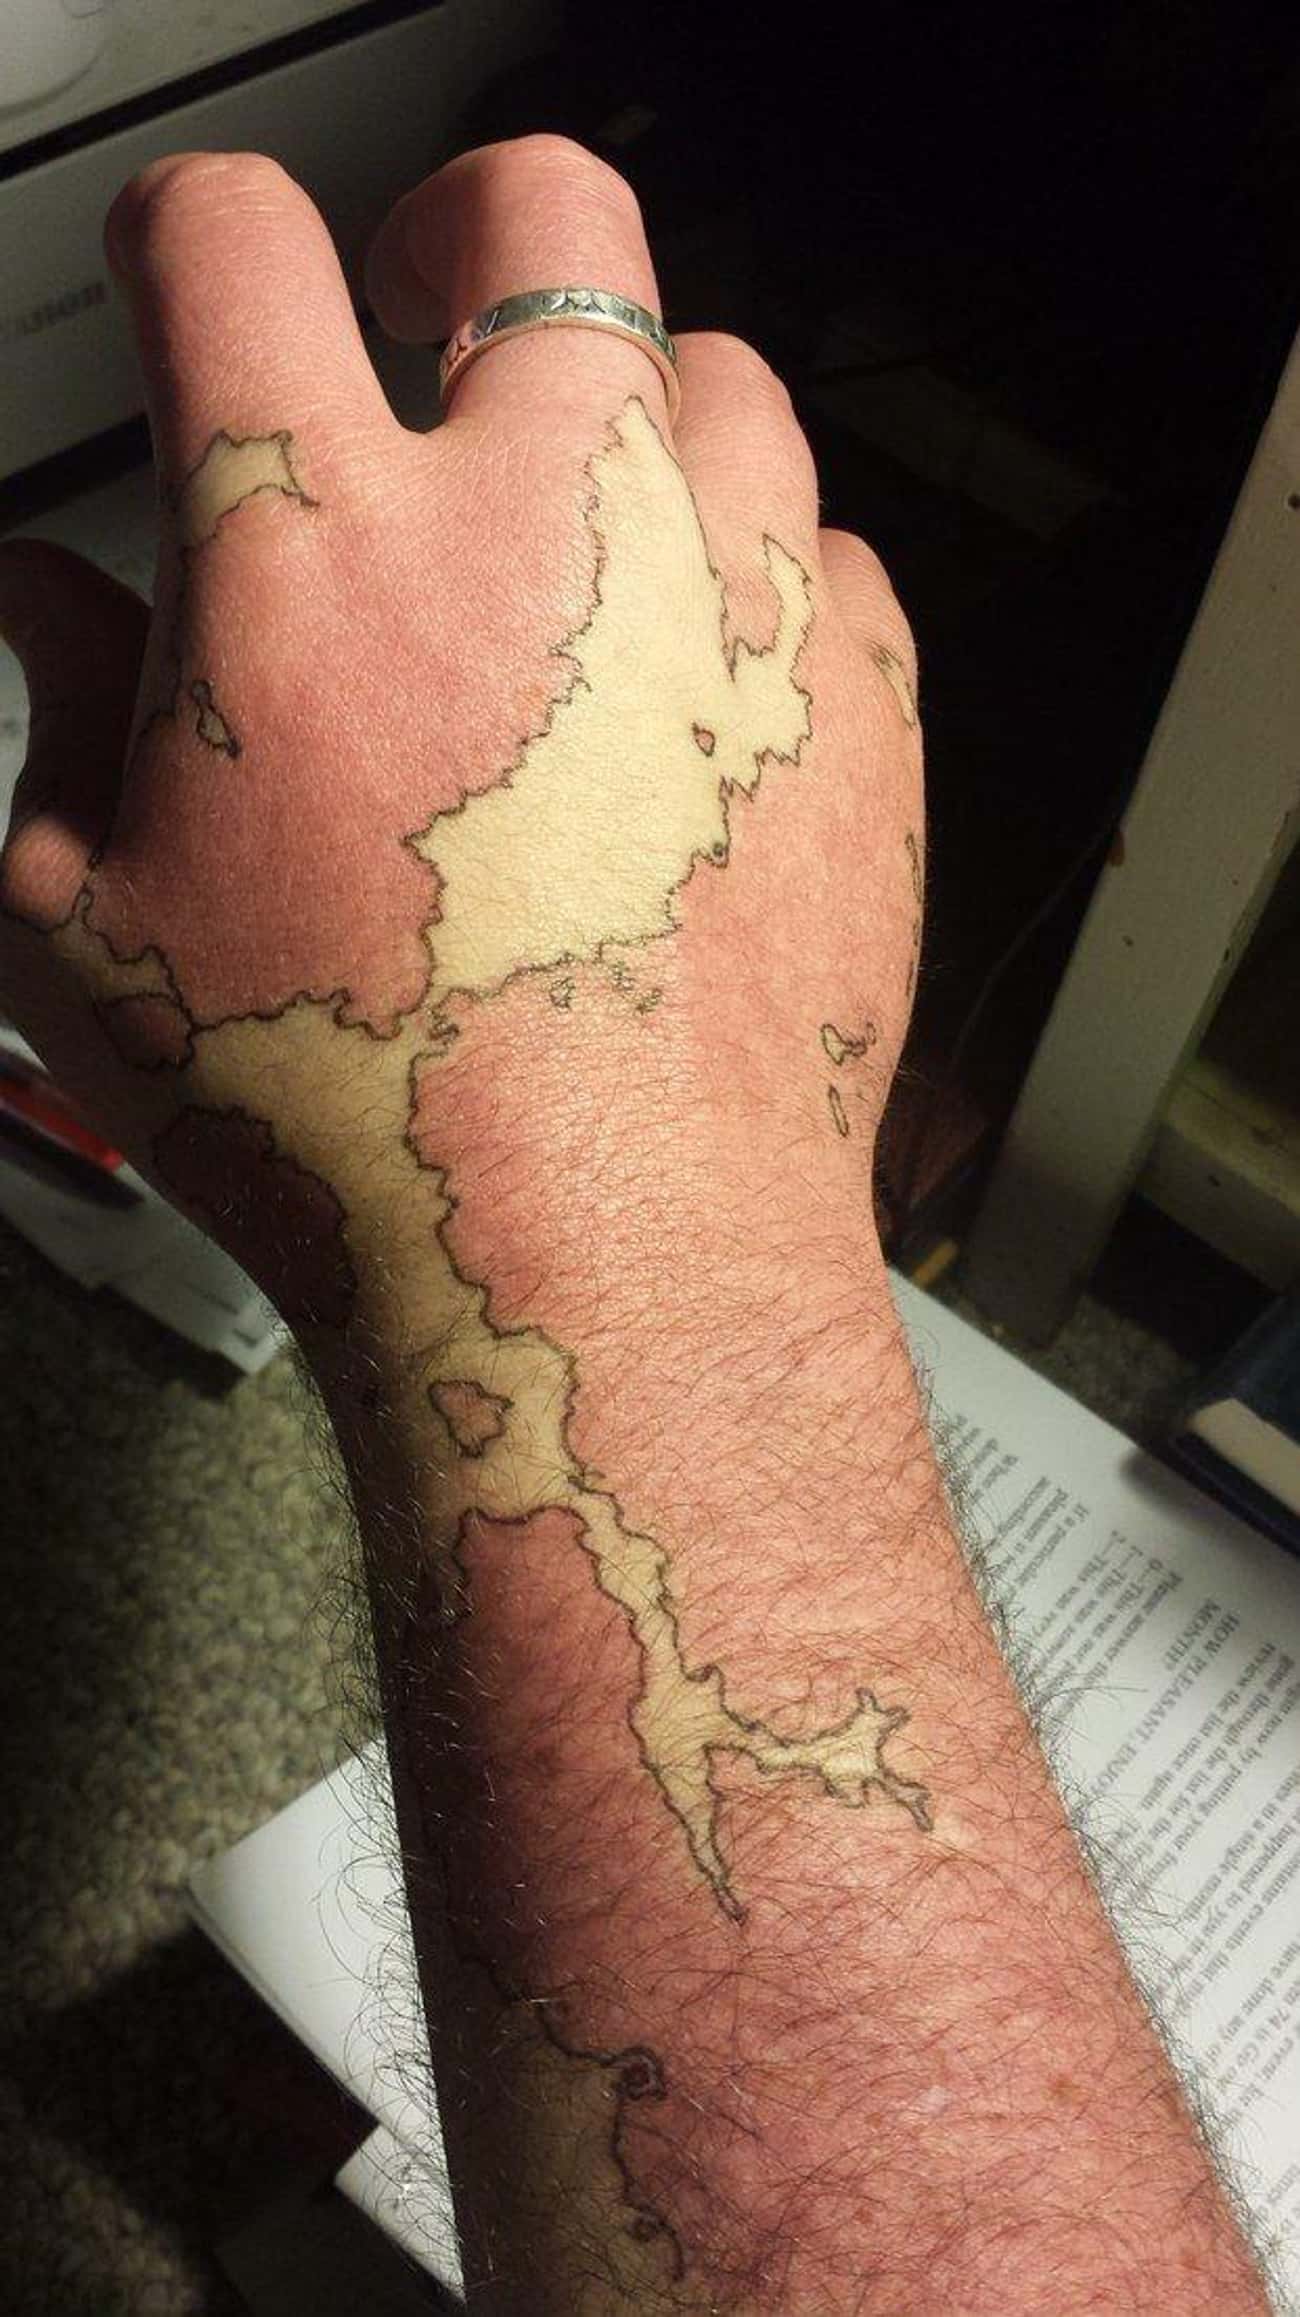 He's Got The Whole World On His Hand